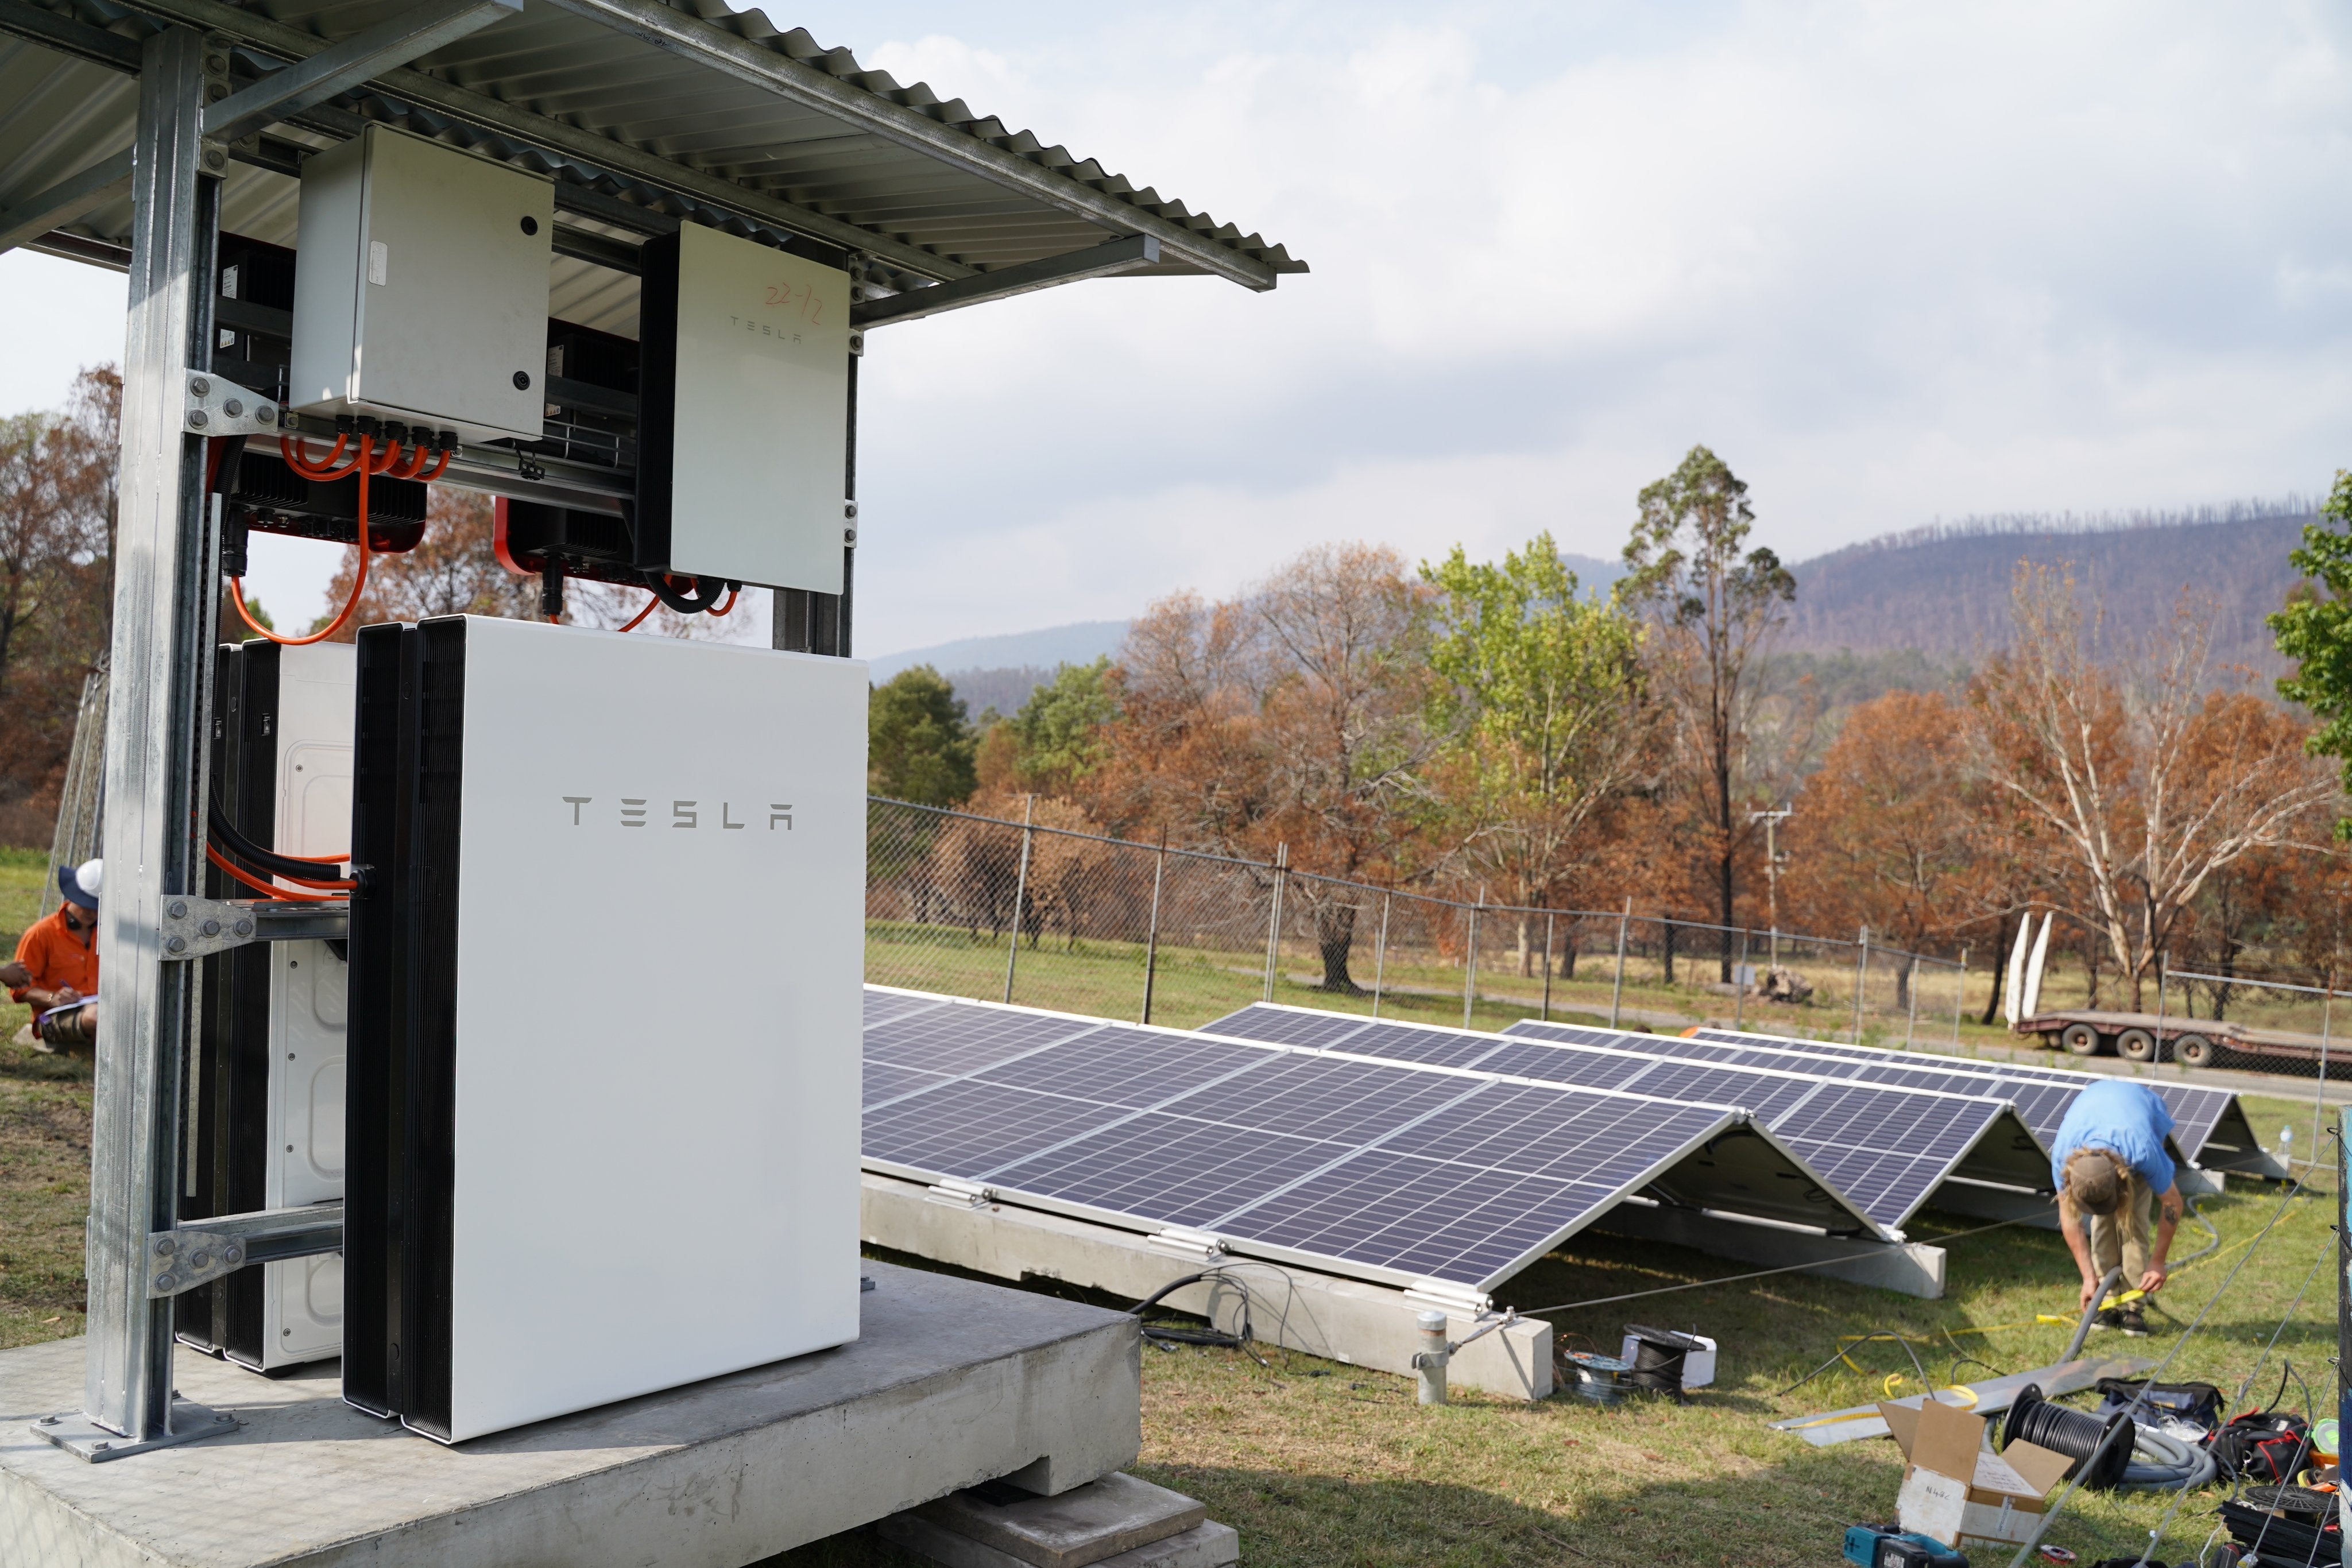 Tesla Powerwalls Being The Important Roles For Australian Natural Disaster Rebuild